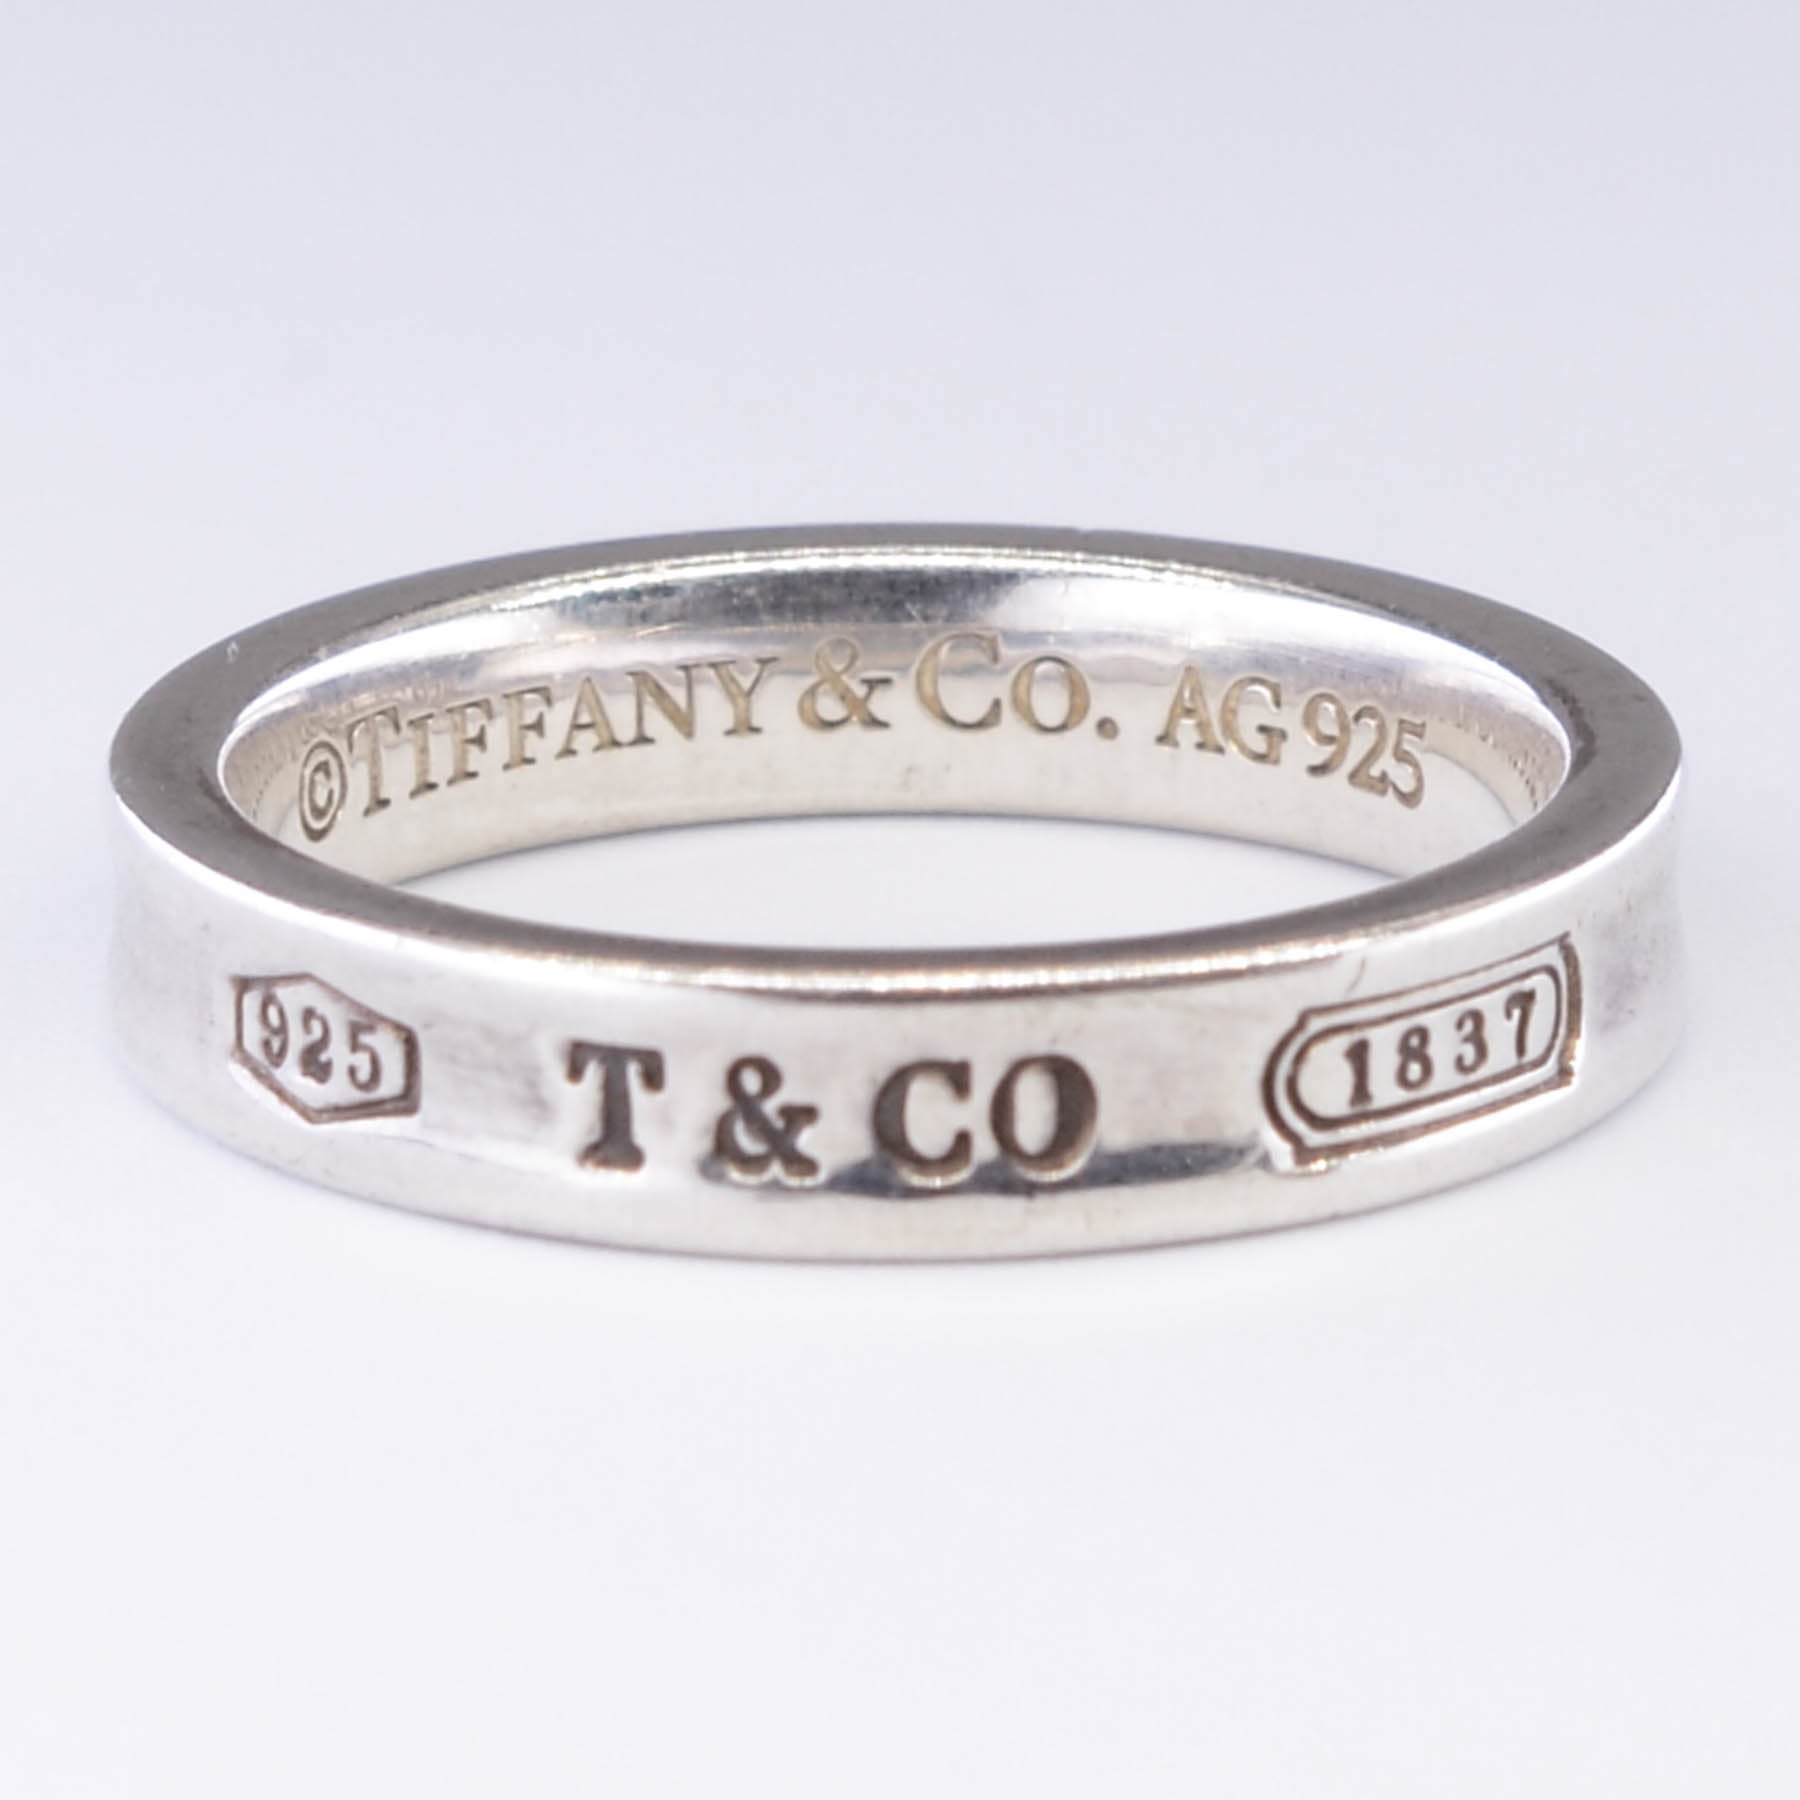 'Tiffany & Co.' 1837 Collection Sterling Silver Ring | SZ 7.5 - 100 Ways